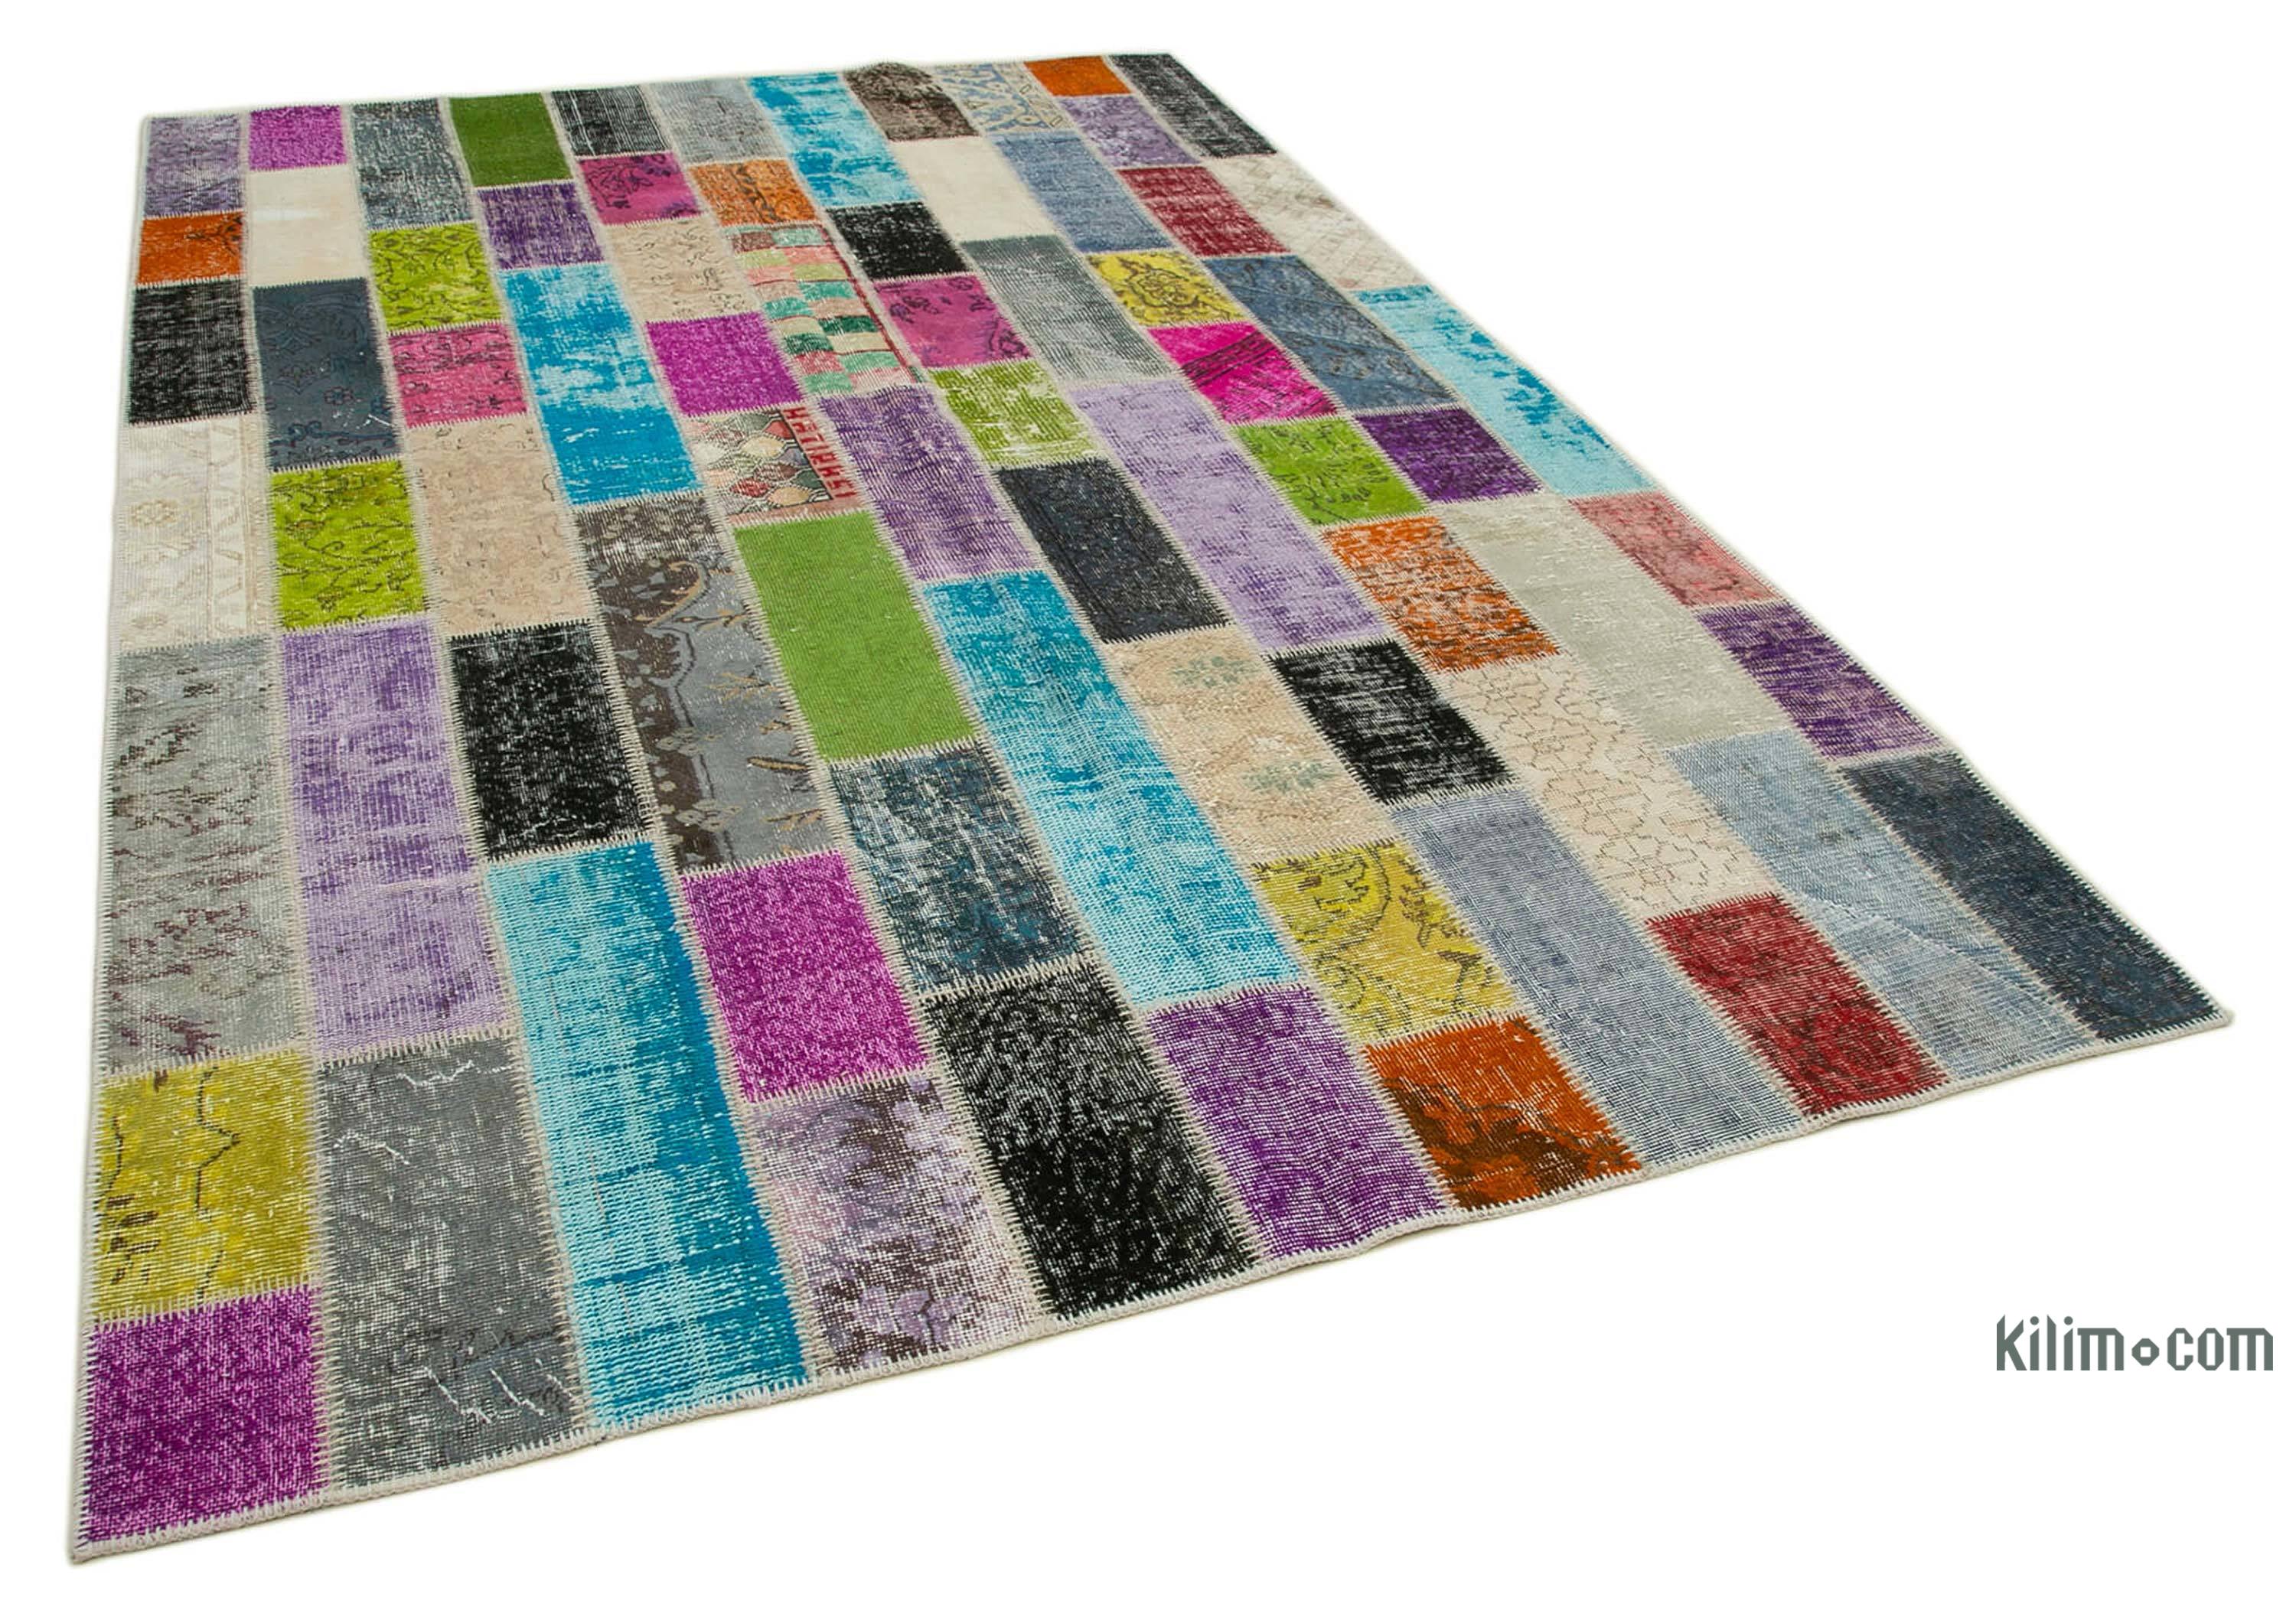 K0051262 Multicolor Patchwork Hand-Knotted Turkish Rug - 6' 7